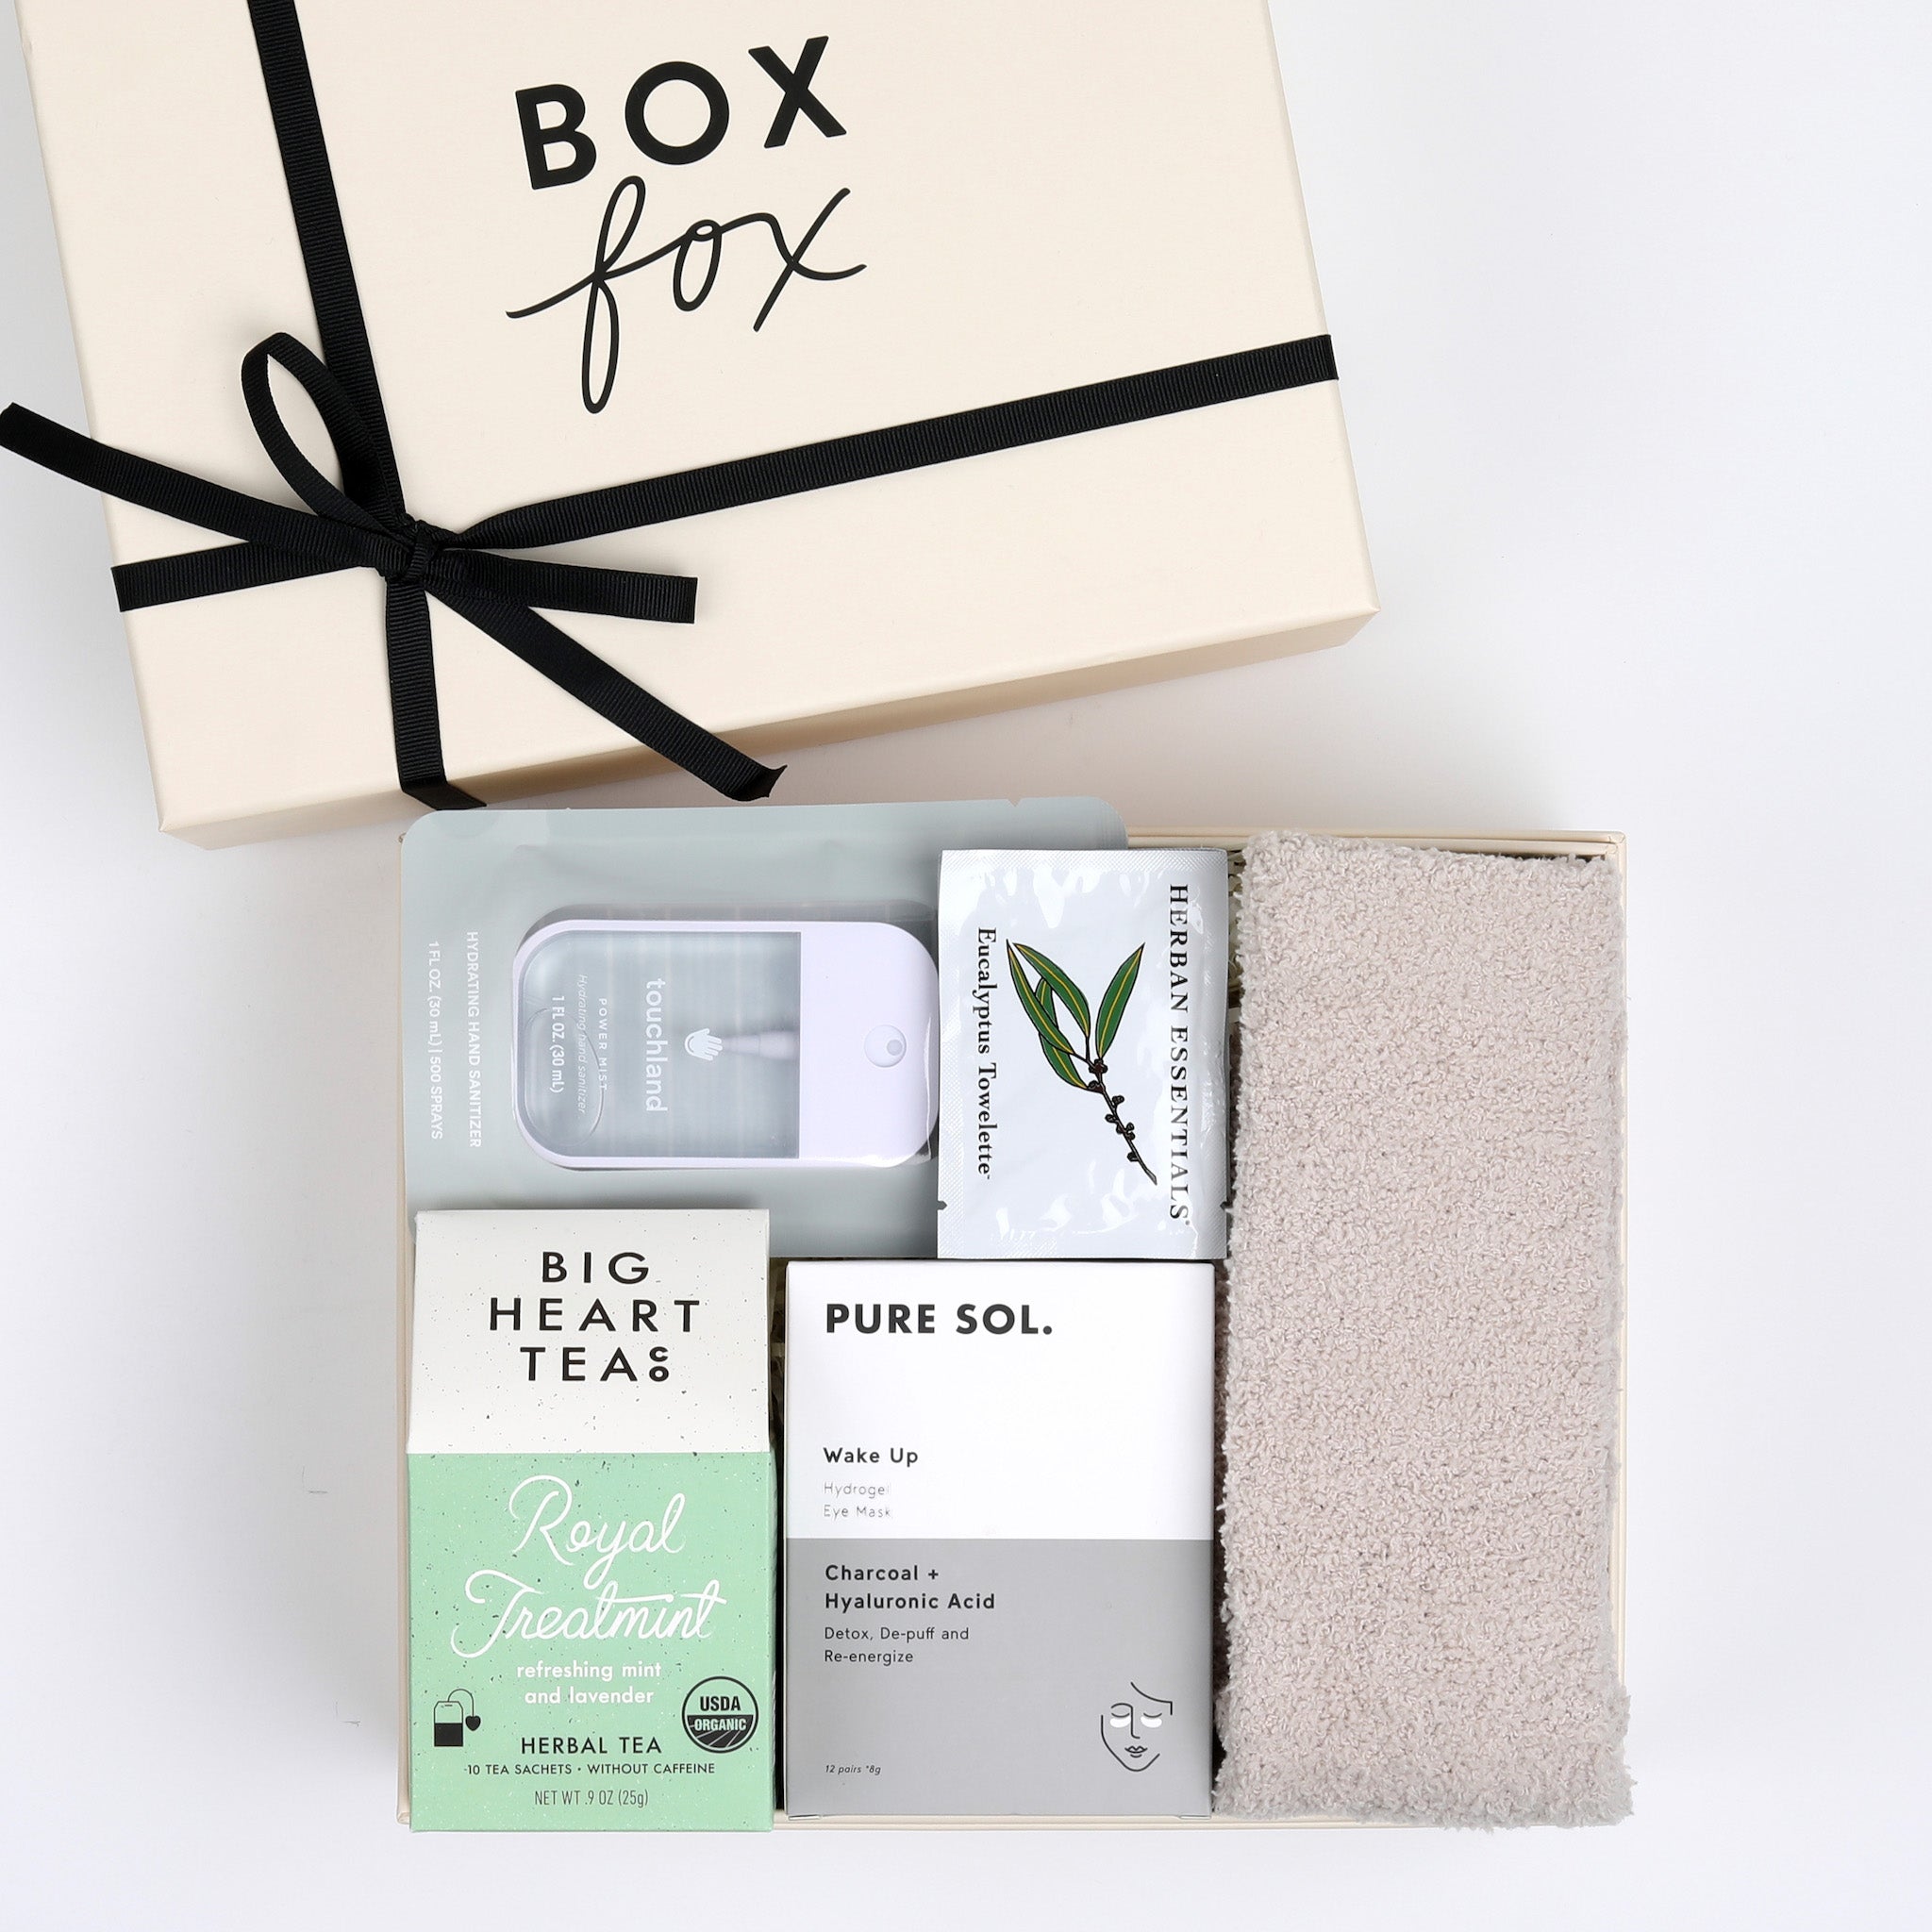 BOXFOX Creme Gift Box filled with Royal Treatmint Big Heart Tea, Pure Sol Charcoal Eye Pads, BOXFOX tan cozy socks, set of Herban Essentials Eucalyptus wipes and Touchland hand sanitizer